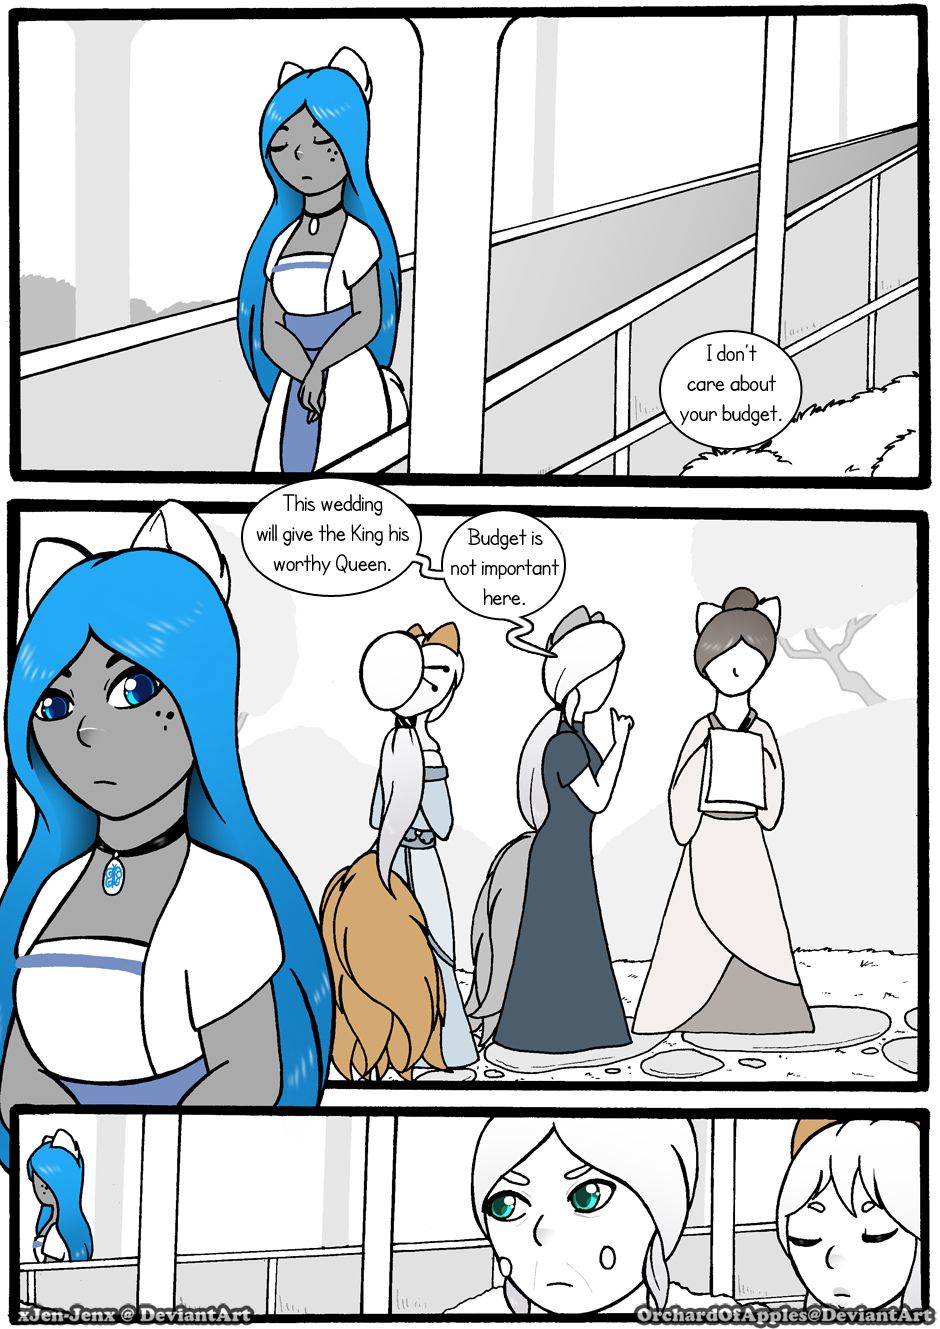 [Jeny-jen94] Between Kings and Queens [Ongoing] 209